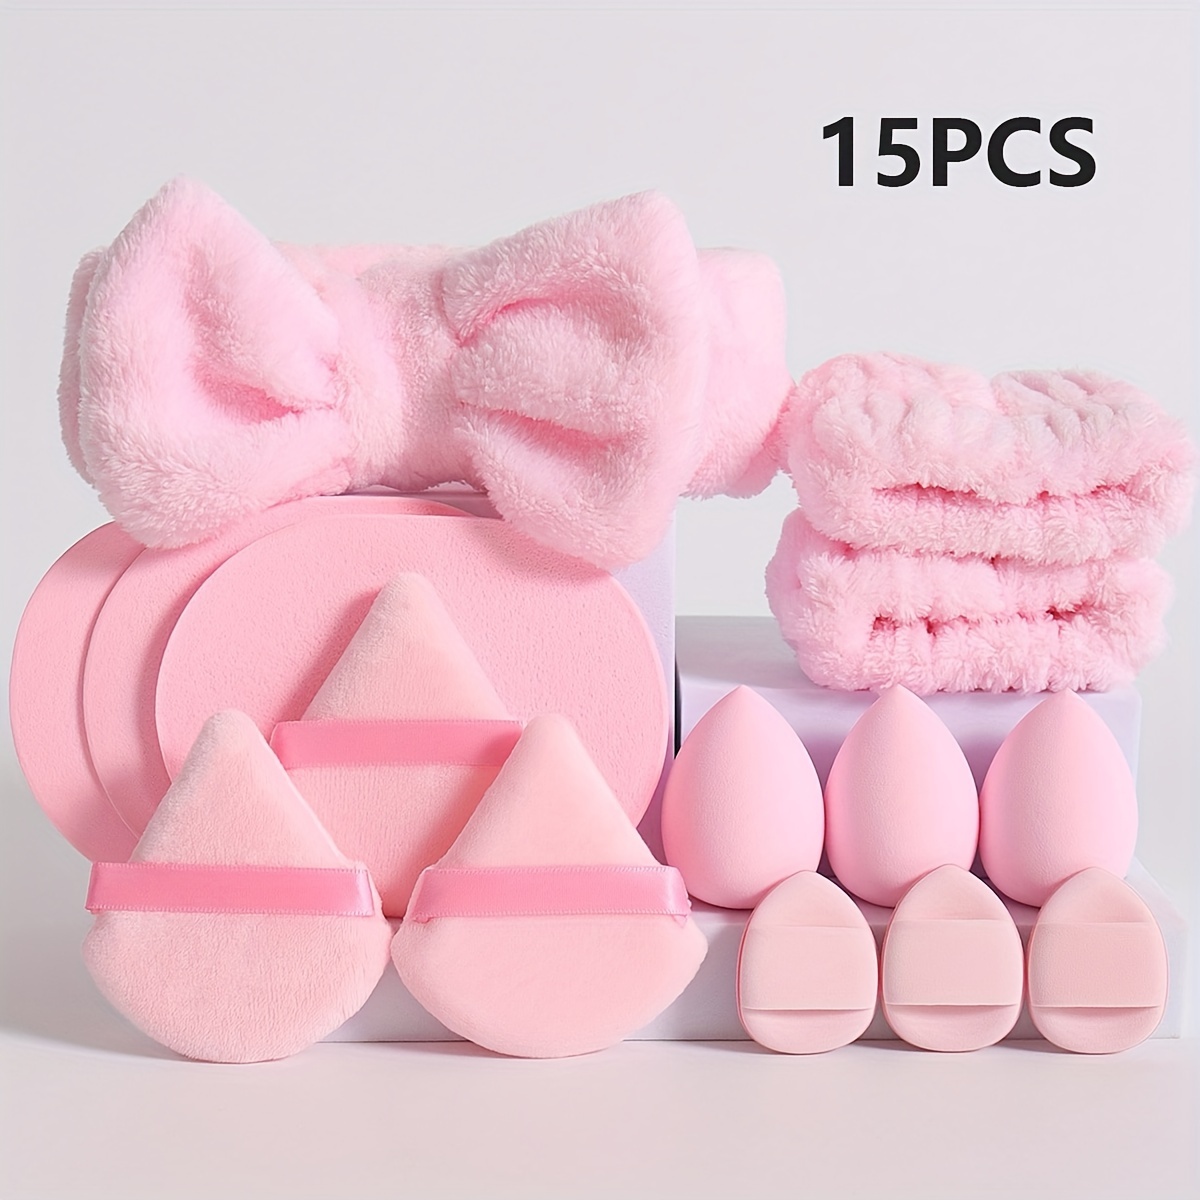 12/15 Pieces Powder Puff Makeup Puff Pure Cotton Powder Velour Face Ultra  Soft Washable Body Powder Puff For Loose Powder Body Cosmetic Foundation  Sponge Makeup Tool With 1pc Bowknot Headband & 2pcs